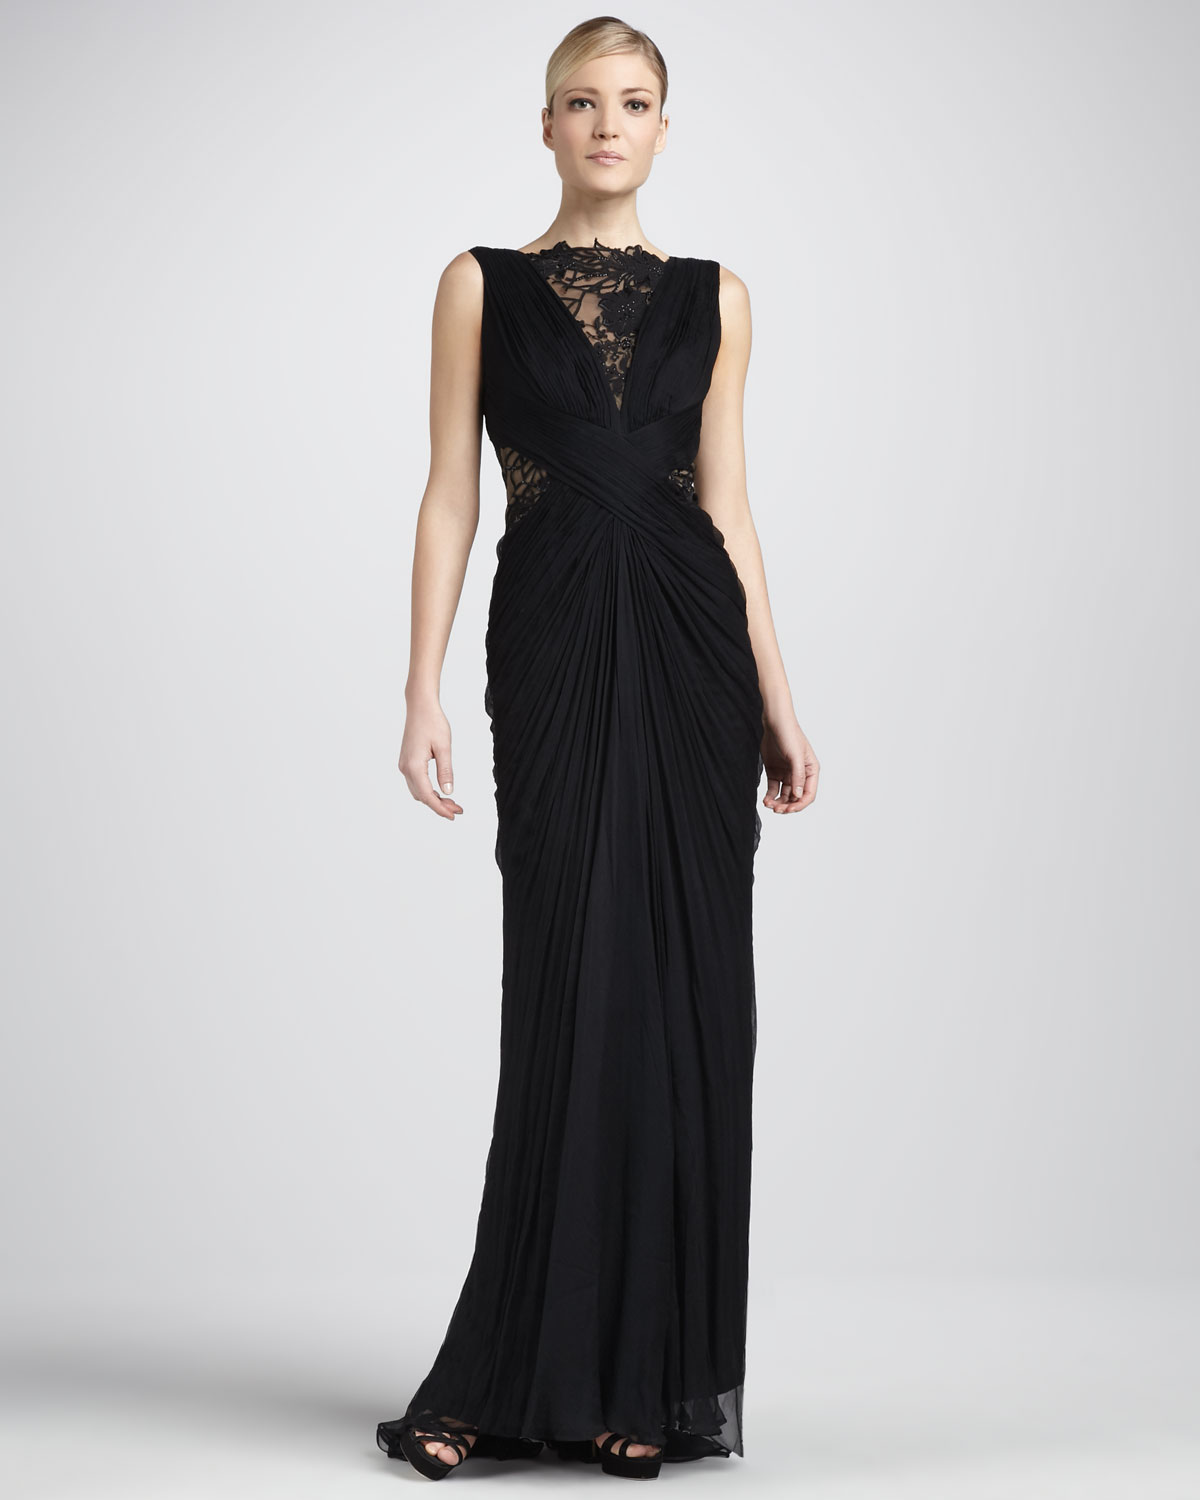 Lyst - Tadashi Shoji Sleeveless Lace and Sequined Illusion Back Gown in ...